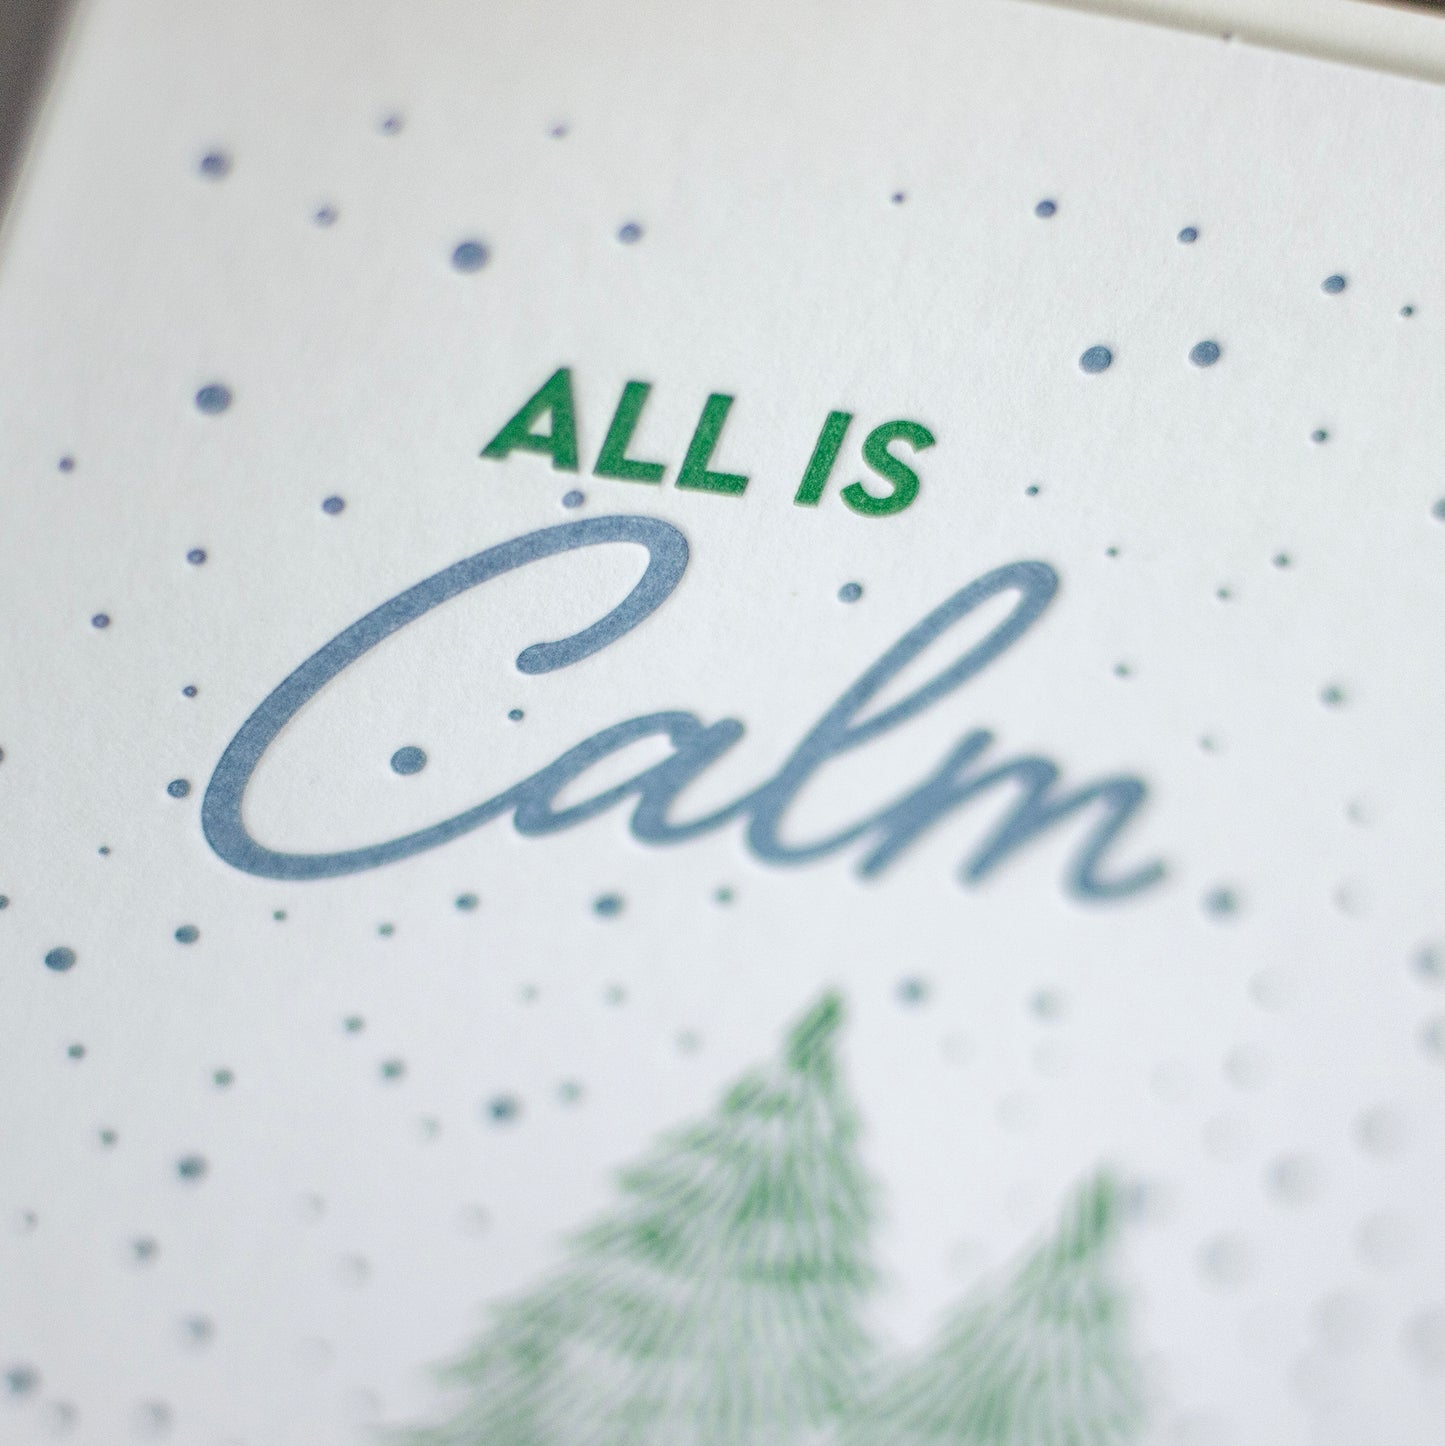 All Is Calm Letterpress Card (Set of 5)